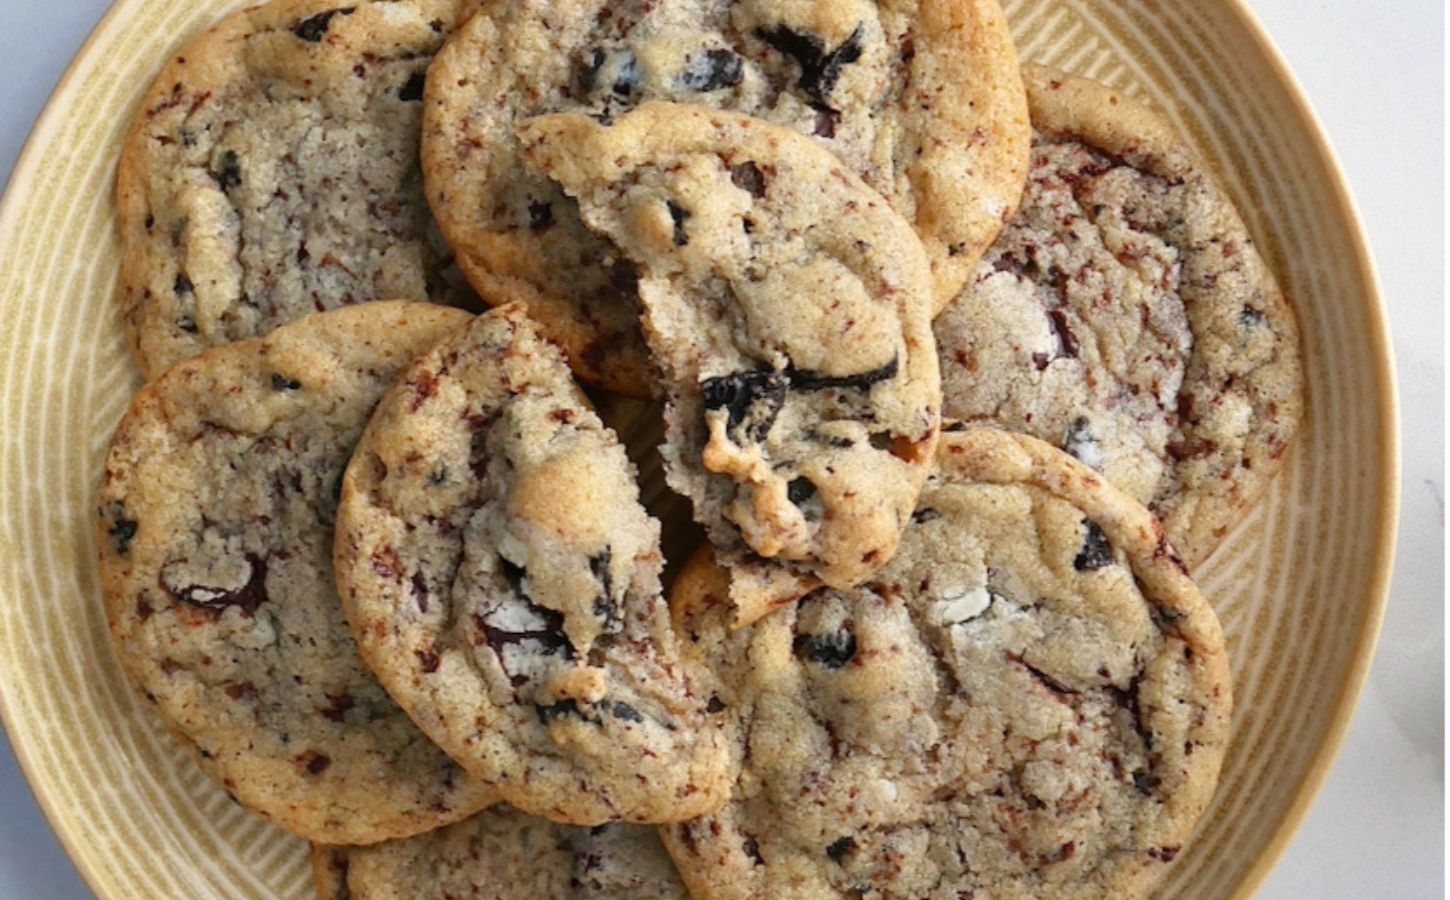 A stack of vegan cookies and cream-flavored biscuits on a plate